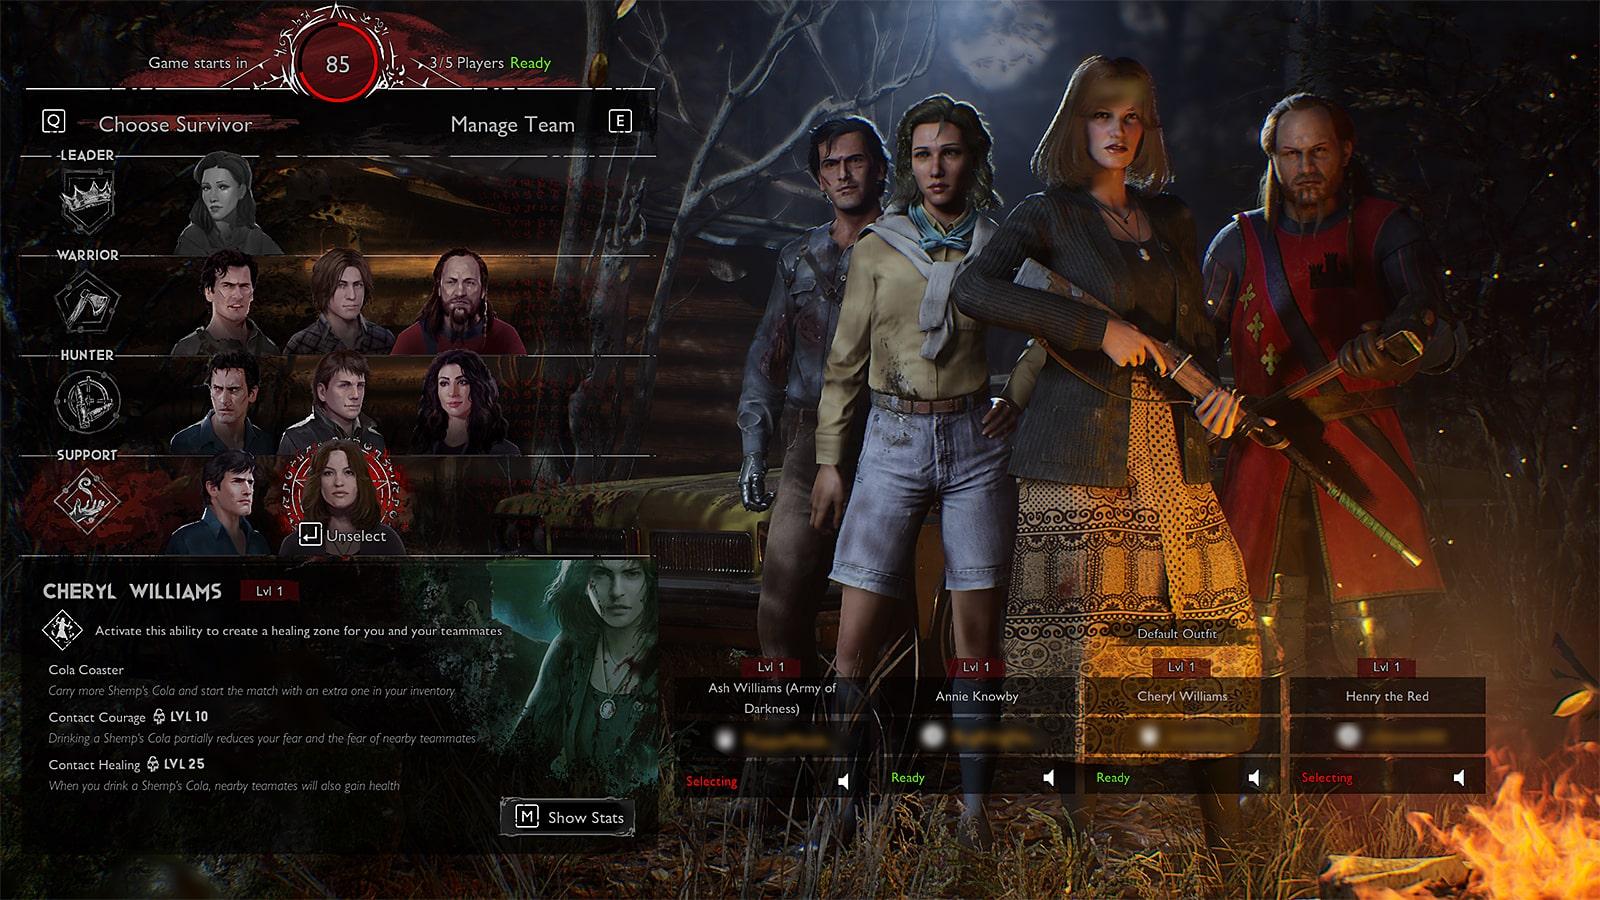 The Survivor select screen in Evil Dead: The Game